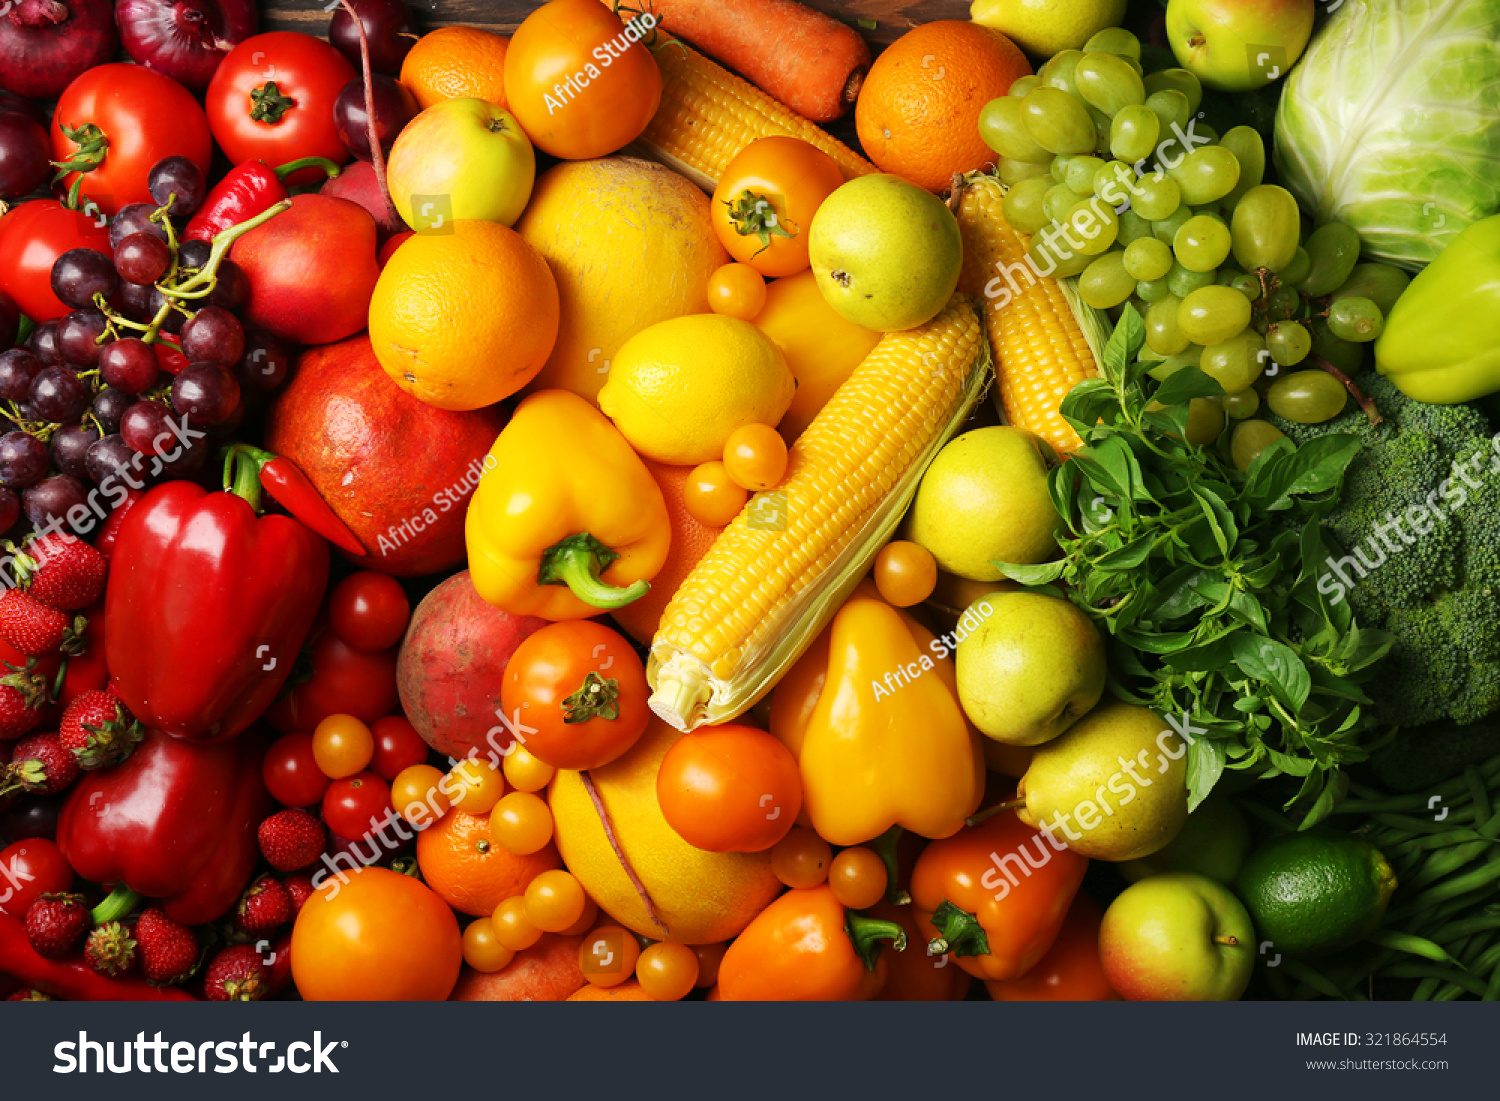 Colorful fruits and vegetables background #321864554